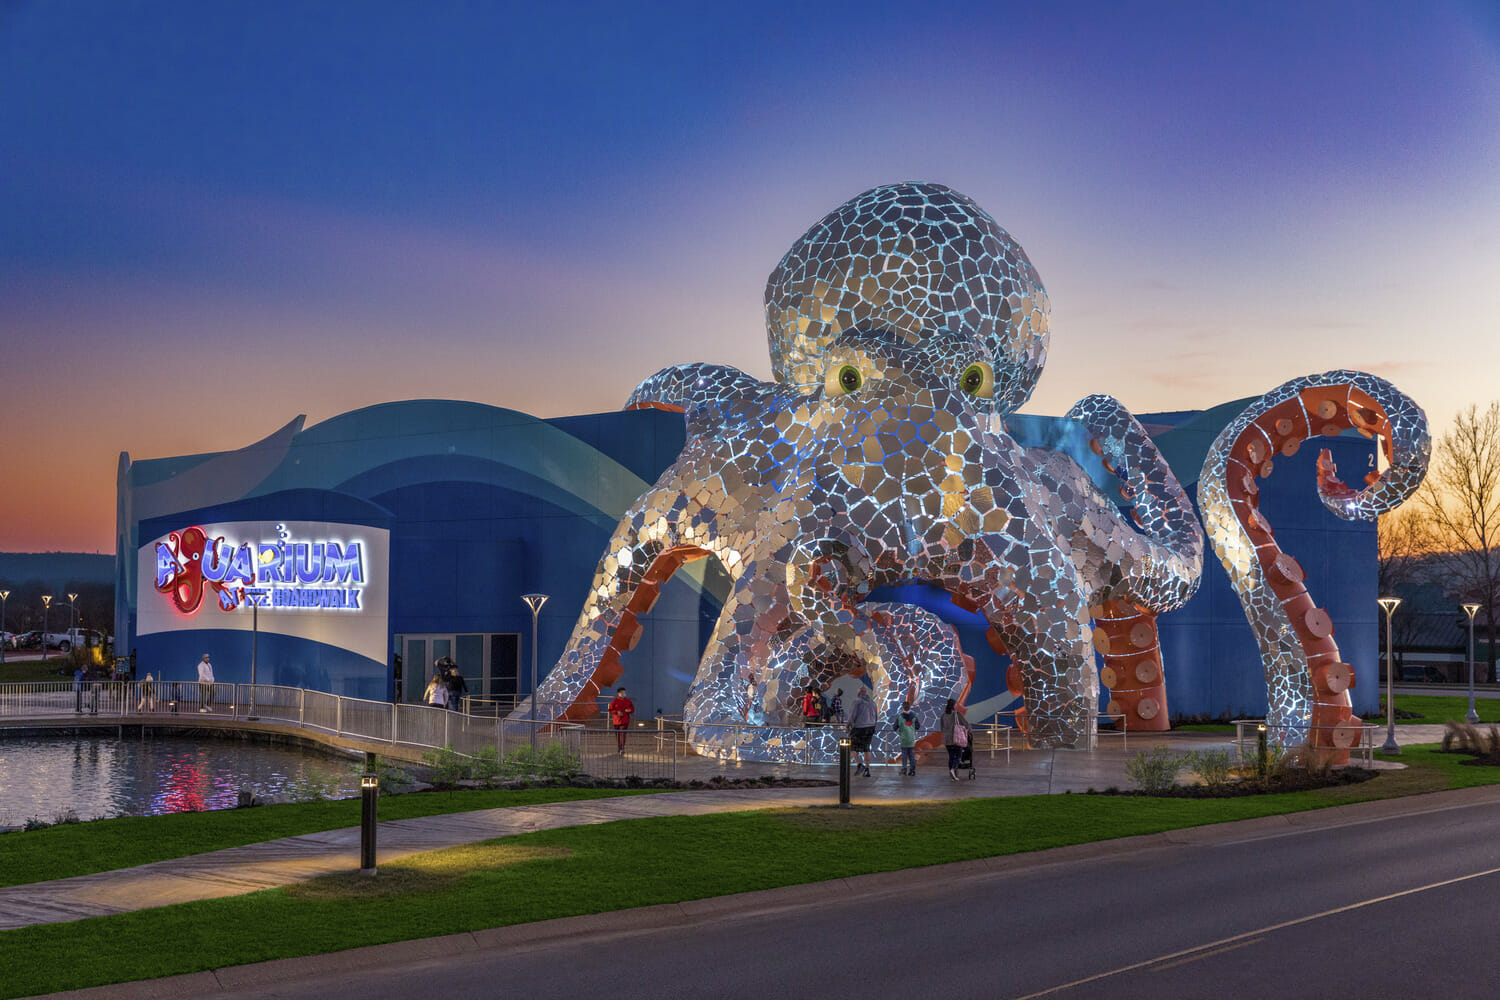 An octopus sculpture in front of a building.